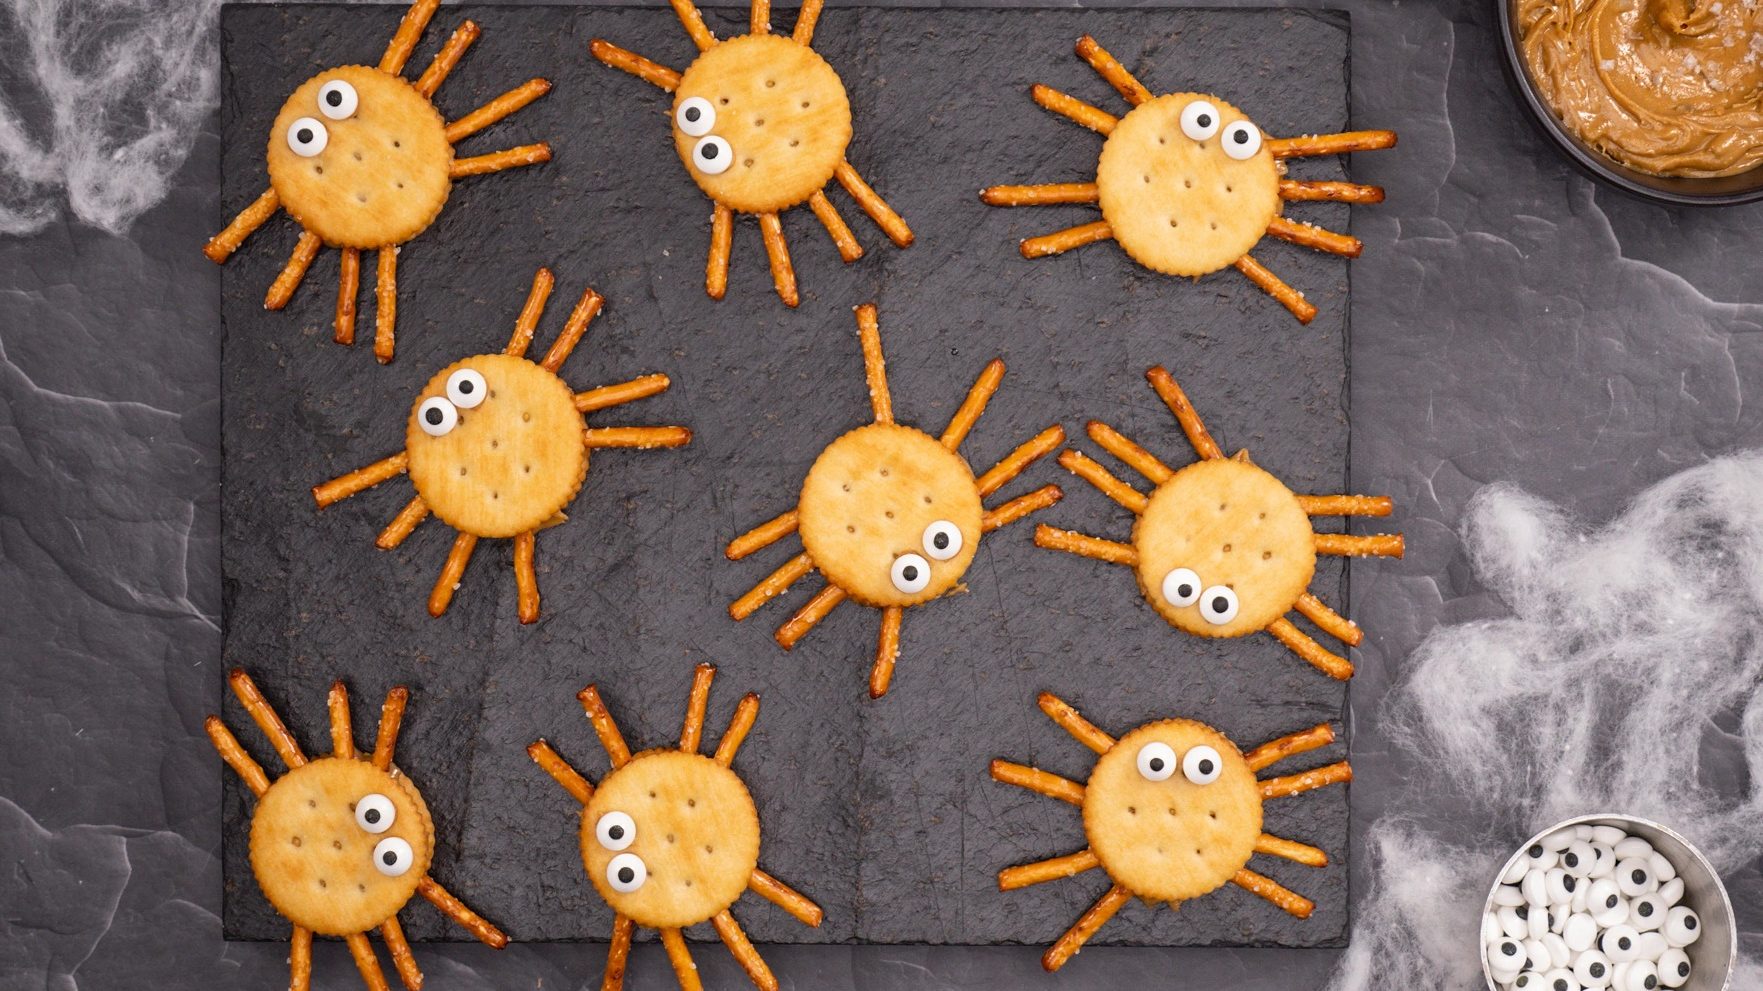 Nine cracker sandwich Halloween spiders with pretzel legs and candy eyes on slate